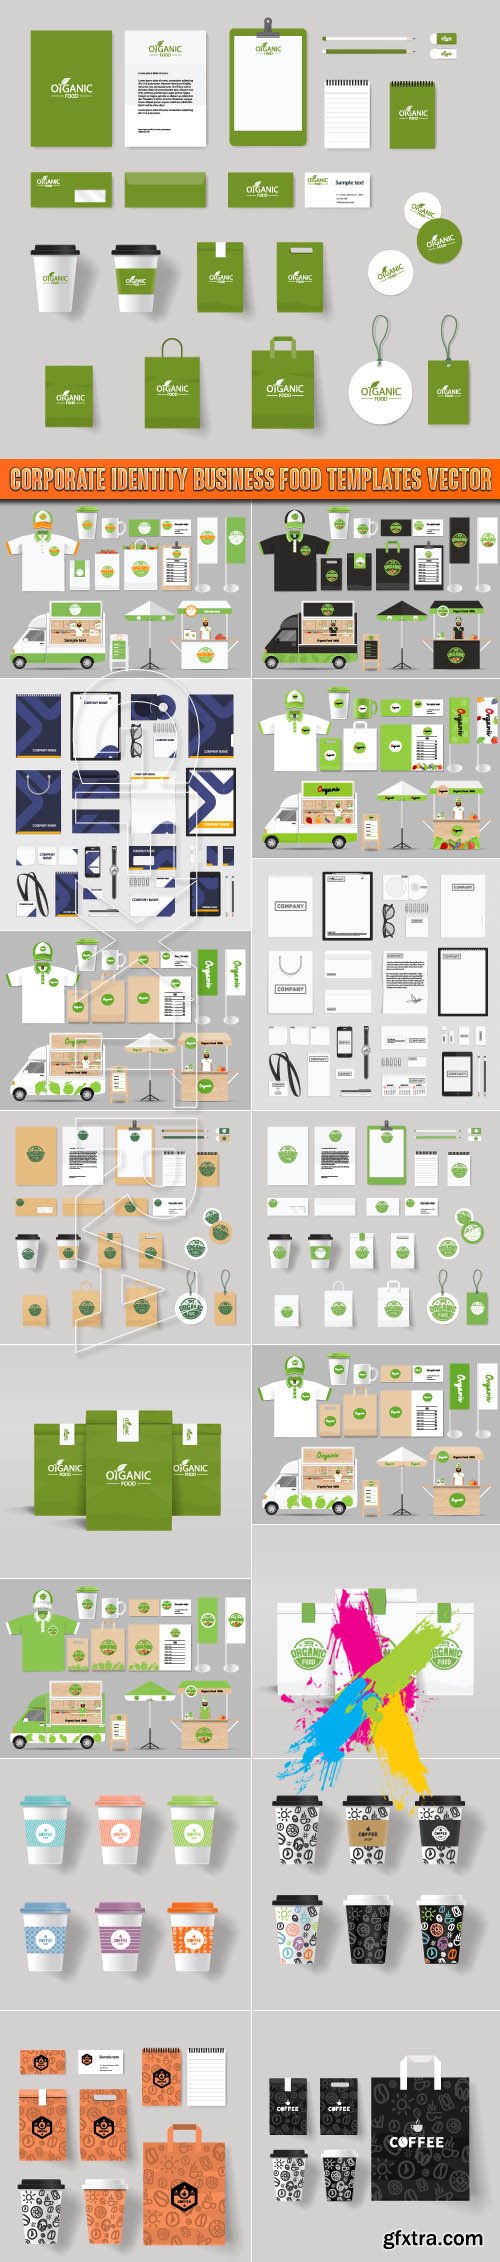 Corporate identity business food templates vector